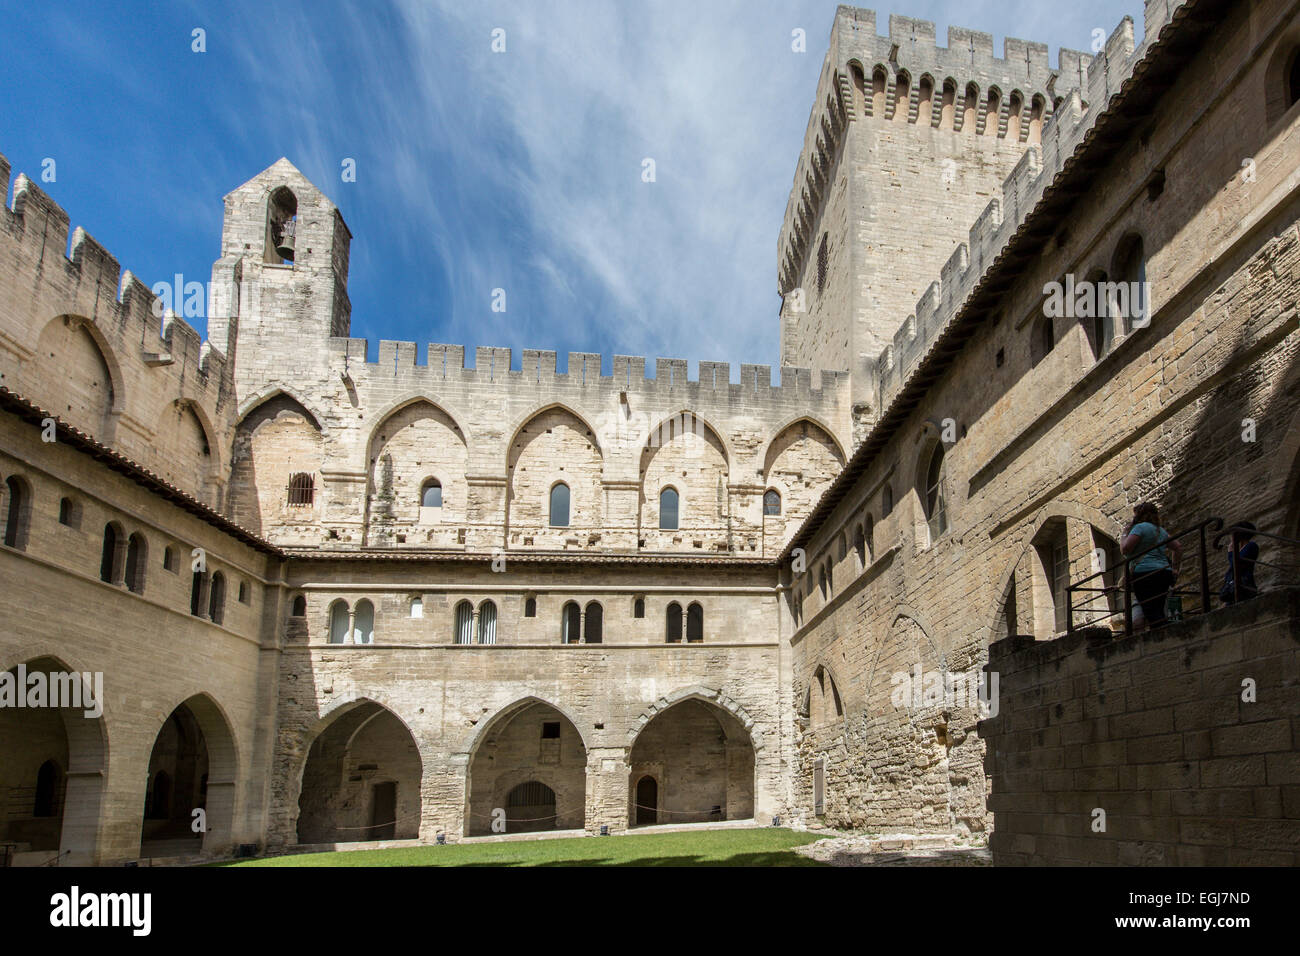 AVIGNON, FRANCE - MAY 12, 2014: A view of the historic papal palace dating back to the middle ages. Stock Photo